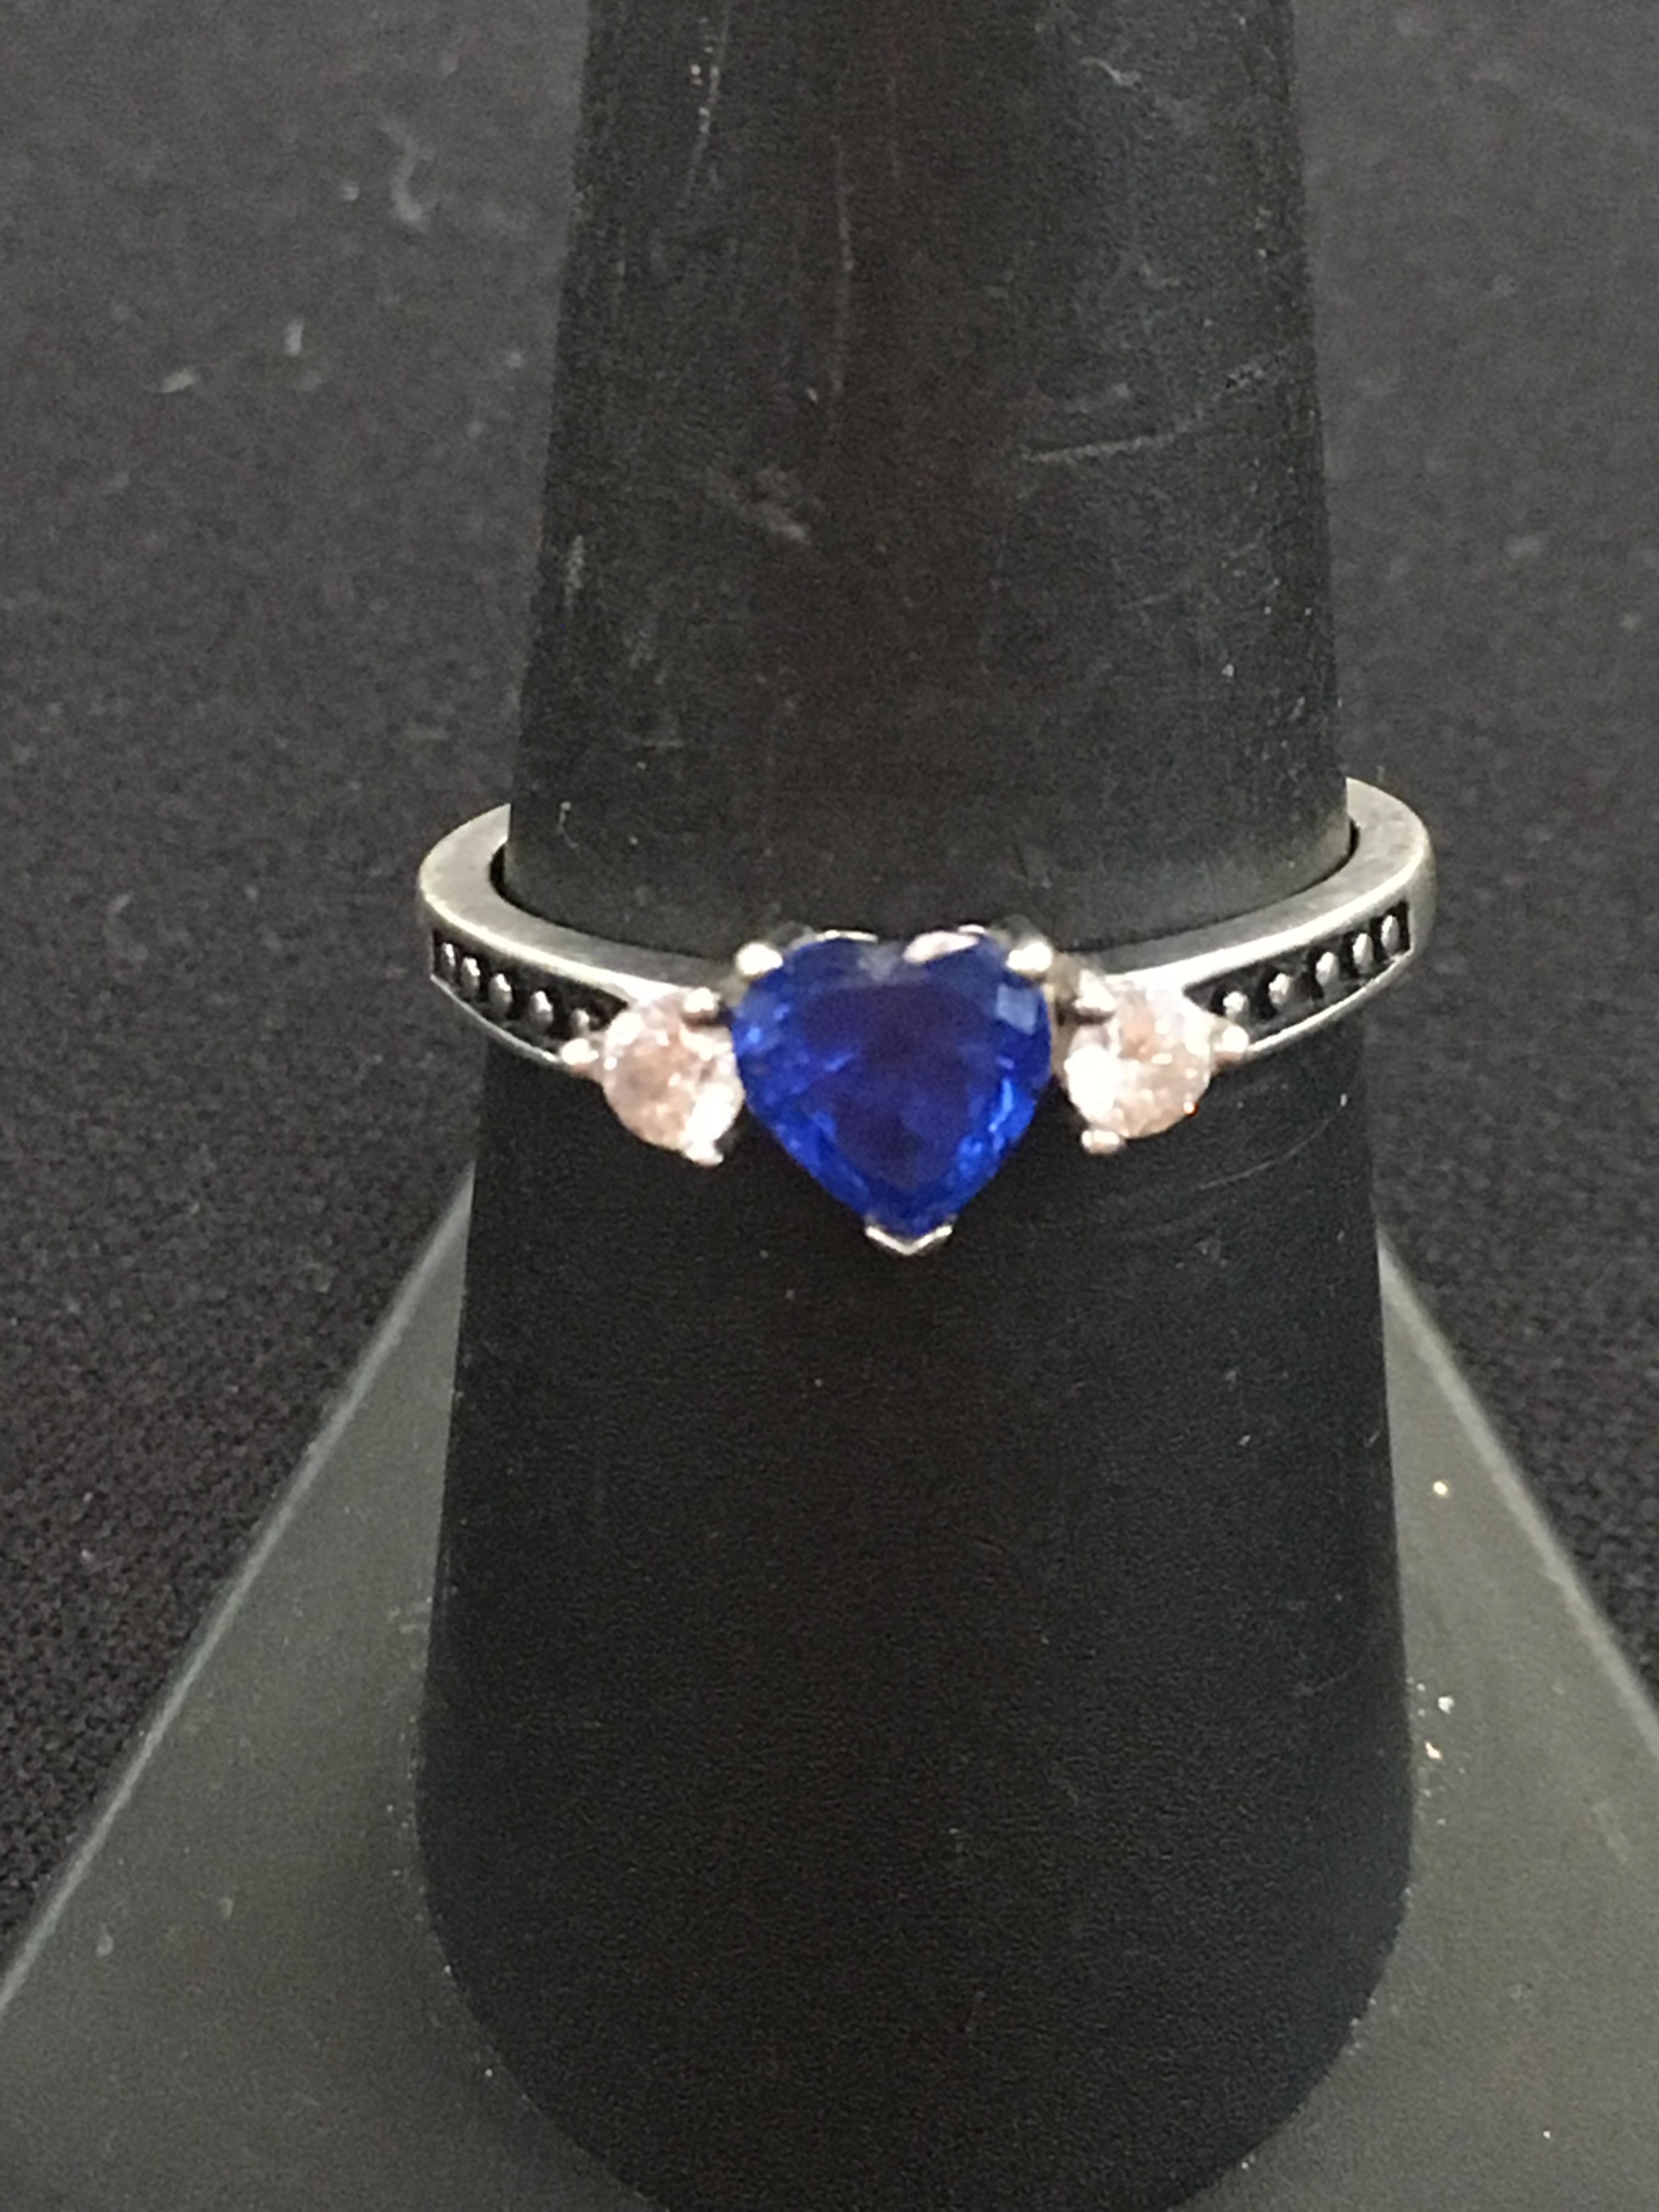 Brilliant Blue Heart Gemstone Flanked by White Gemstones in Sterling Silver Ring - Size 8